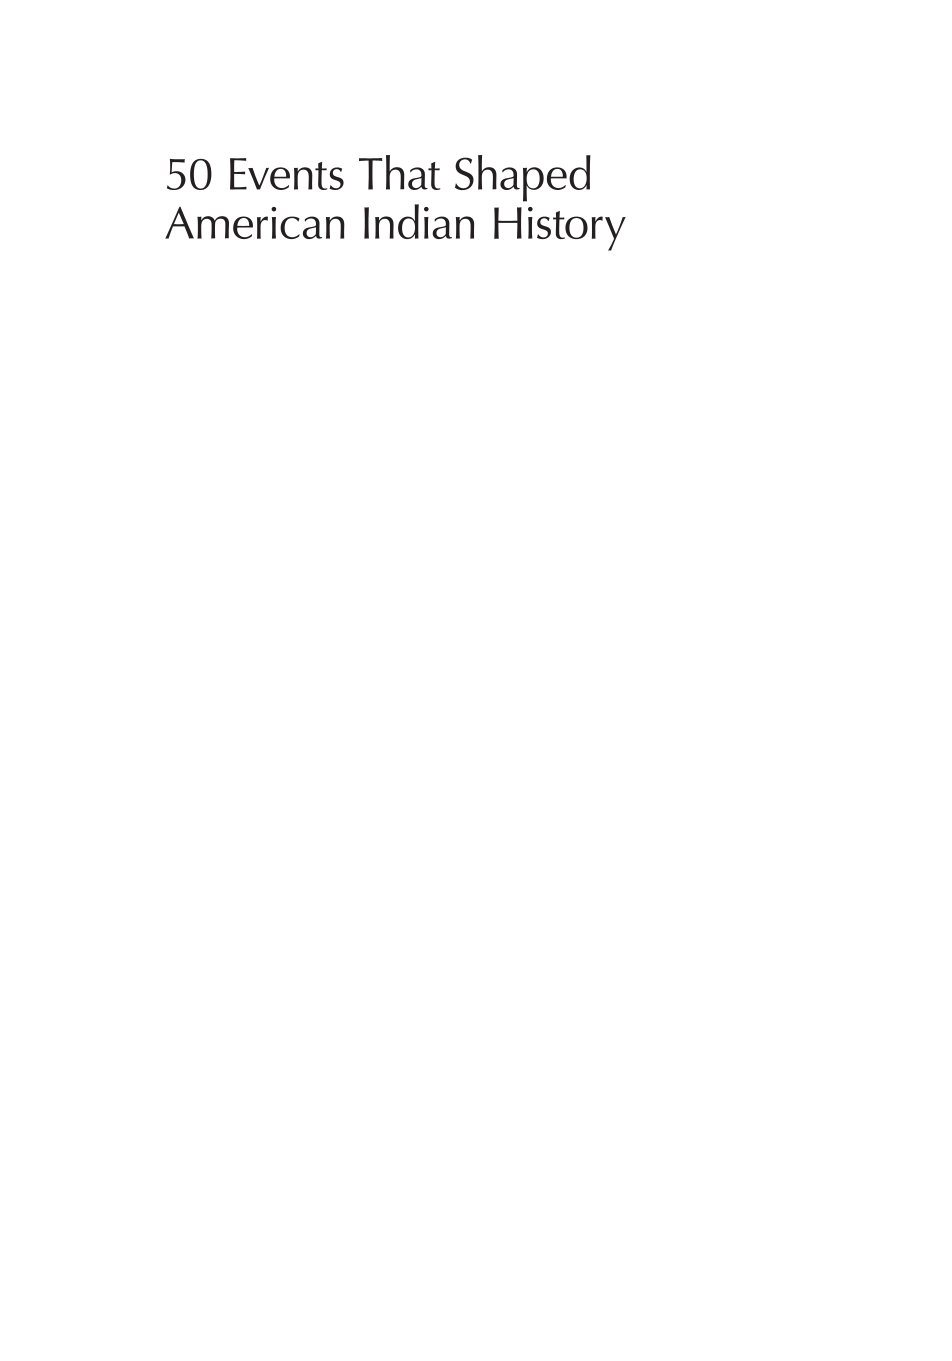 50 Events That Shaped American Indian History: An Encyclopedia of the American Mosaic [2 volumes] page i